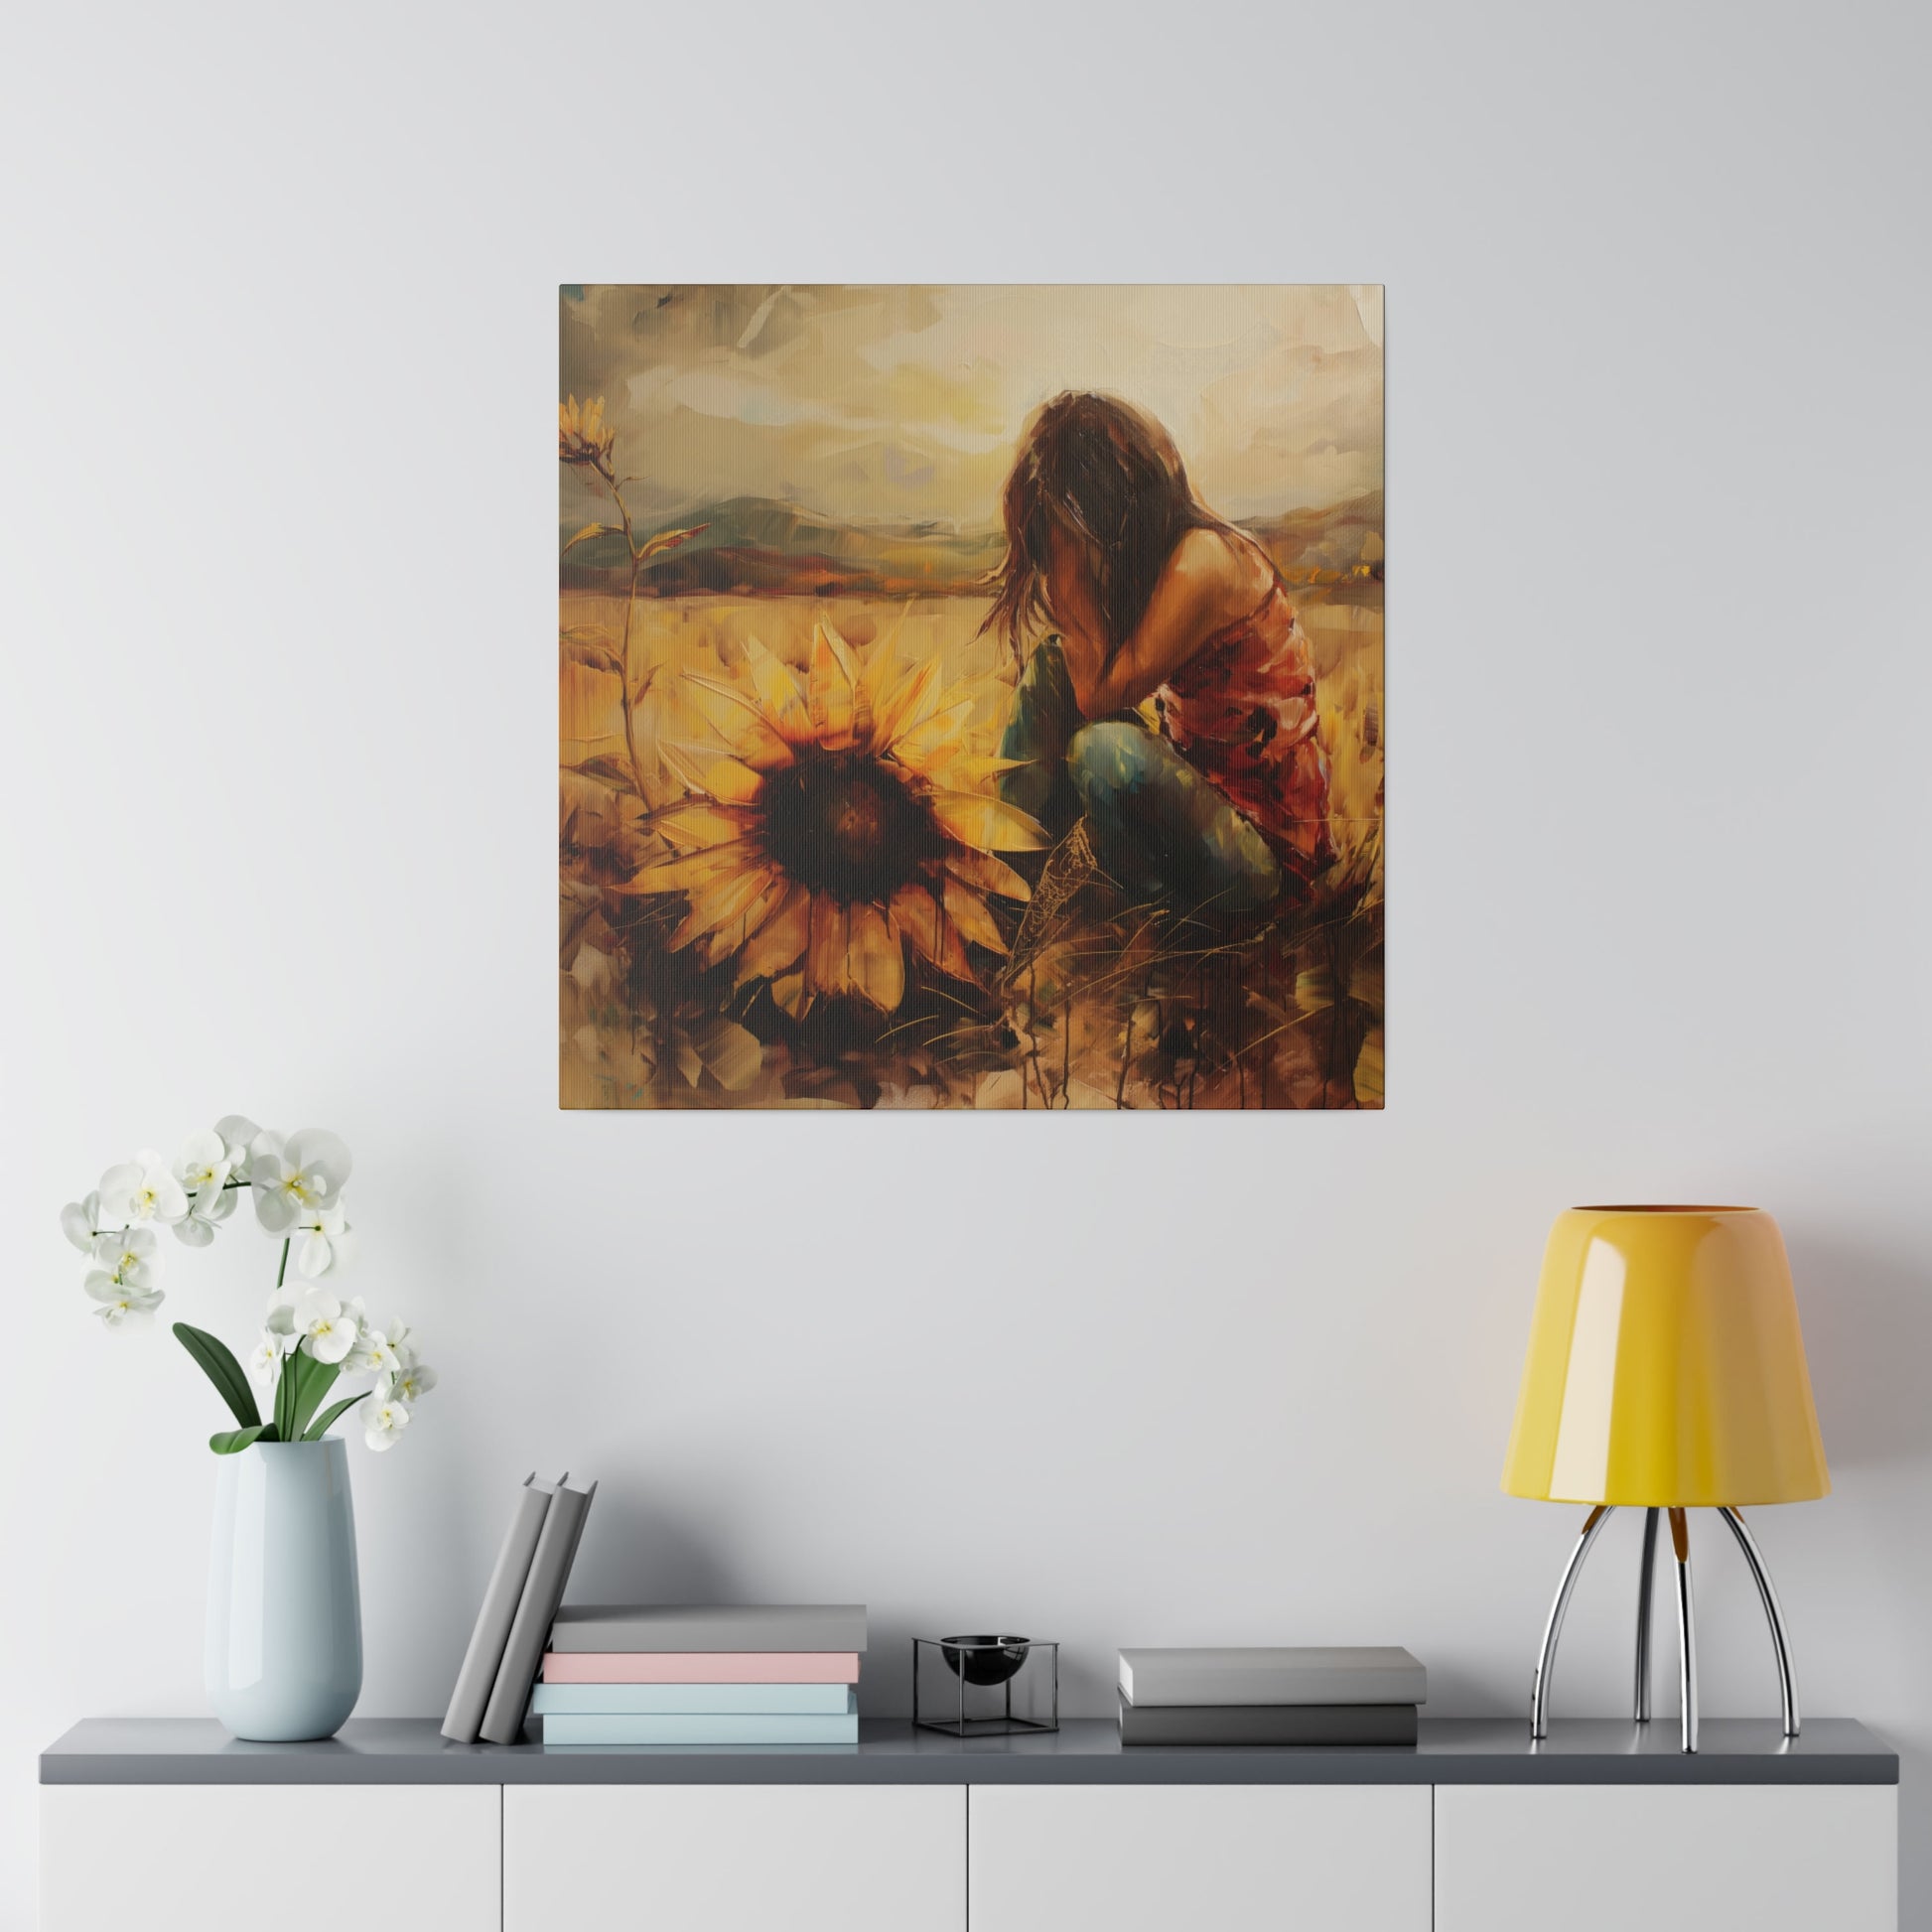 A painting that captures the human experience amidst sunflowers hangs on a wall above a modern sideboard with decorative items. Elena Duval: Solace in Solitude Exclusive Canvas Print by Printify.